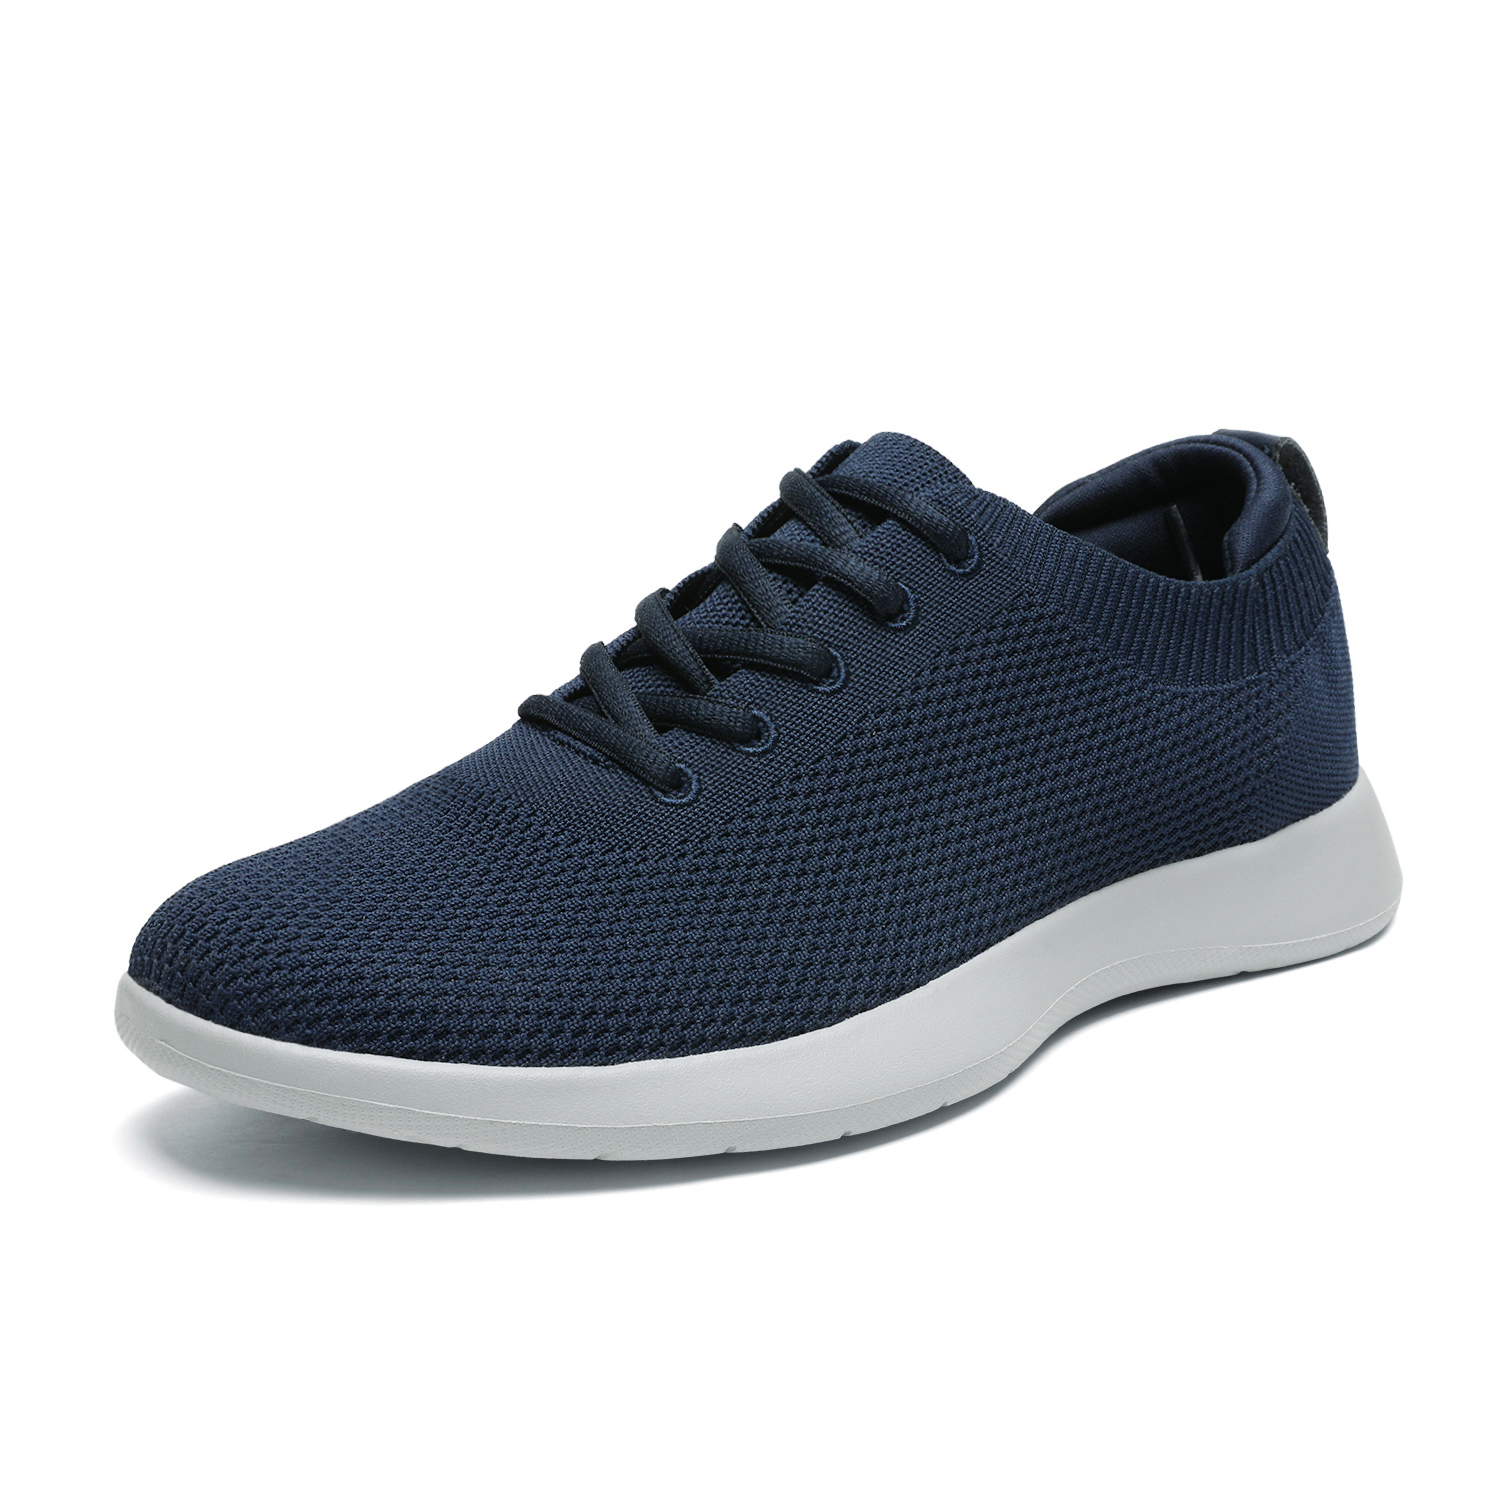 Bruno Marc Mens Fashion Comfort Walking Shoes Breathable Fashion Sneaker Casual Shoe Size 6.5-13 LEGEND-2 NAVY Size 13 - image 1 of 5